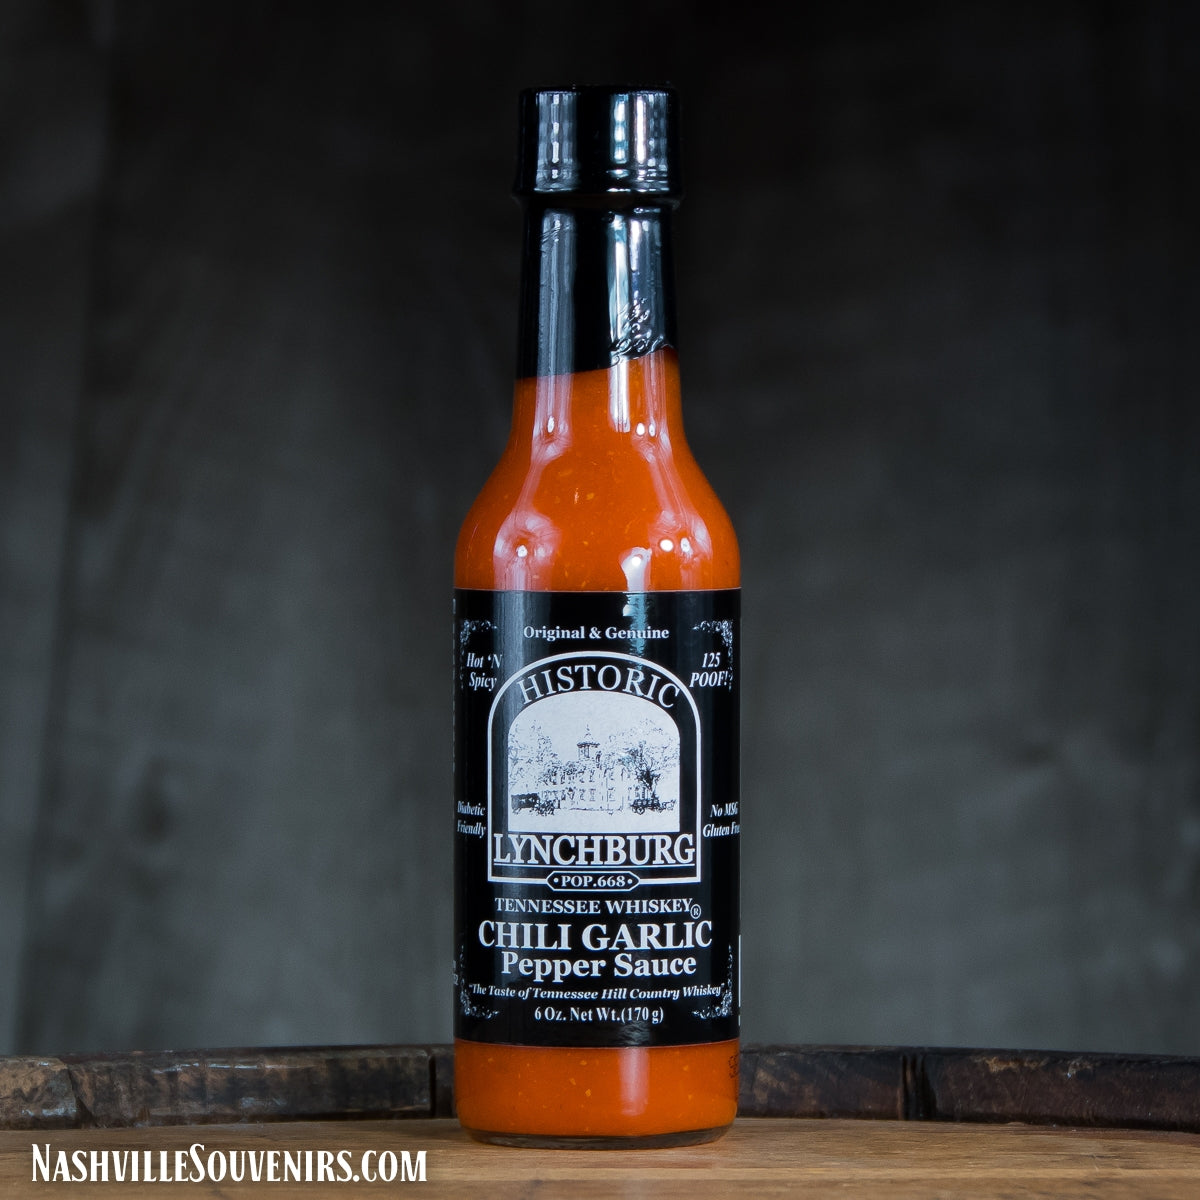 Wow! This Historic Lynchburg Chili Garlic Pepper sauce is hot - but oh so good! FREE SHIPPING on all US orders over $75!